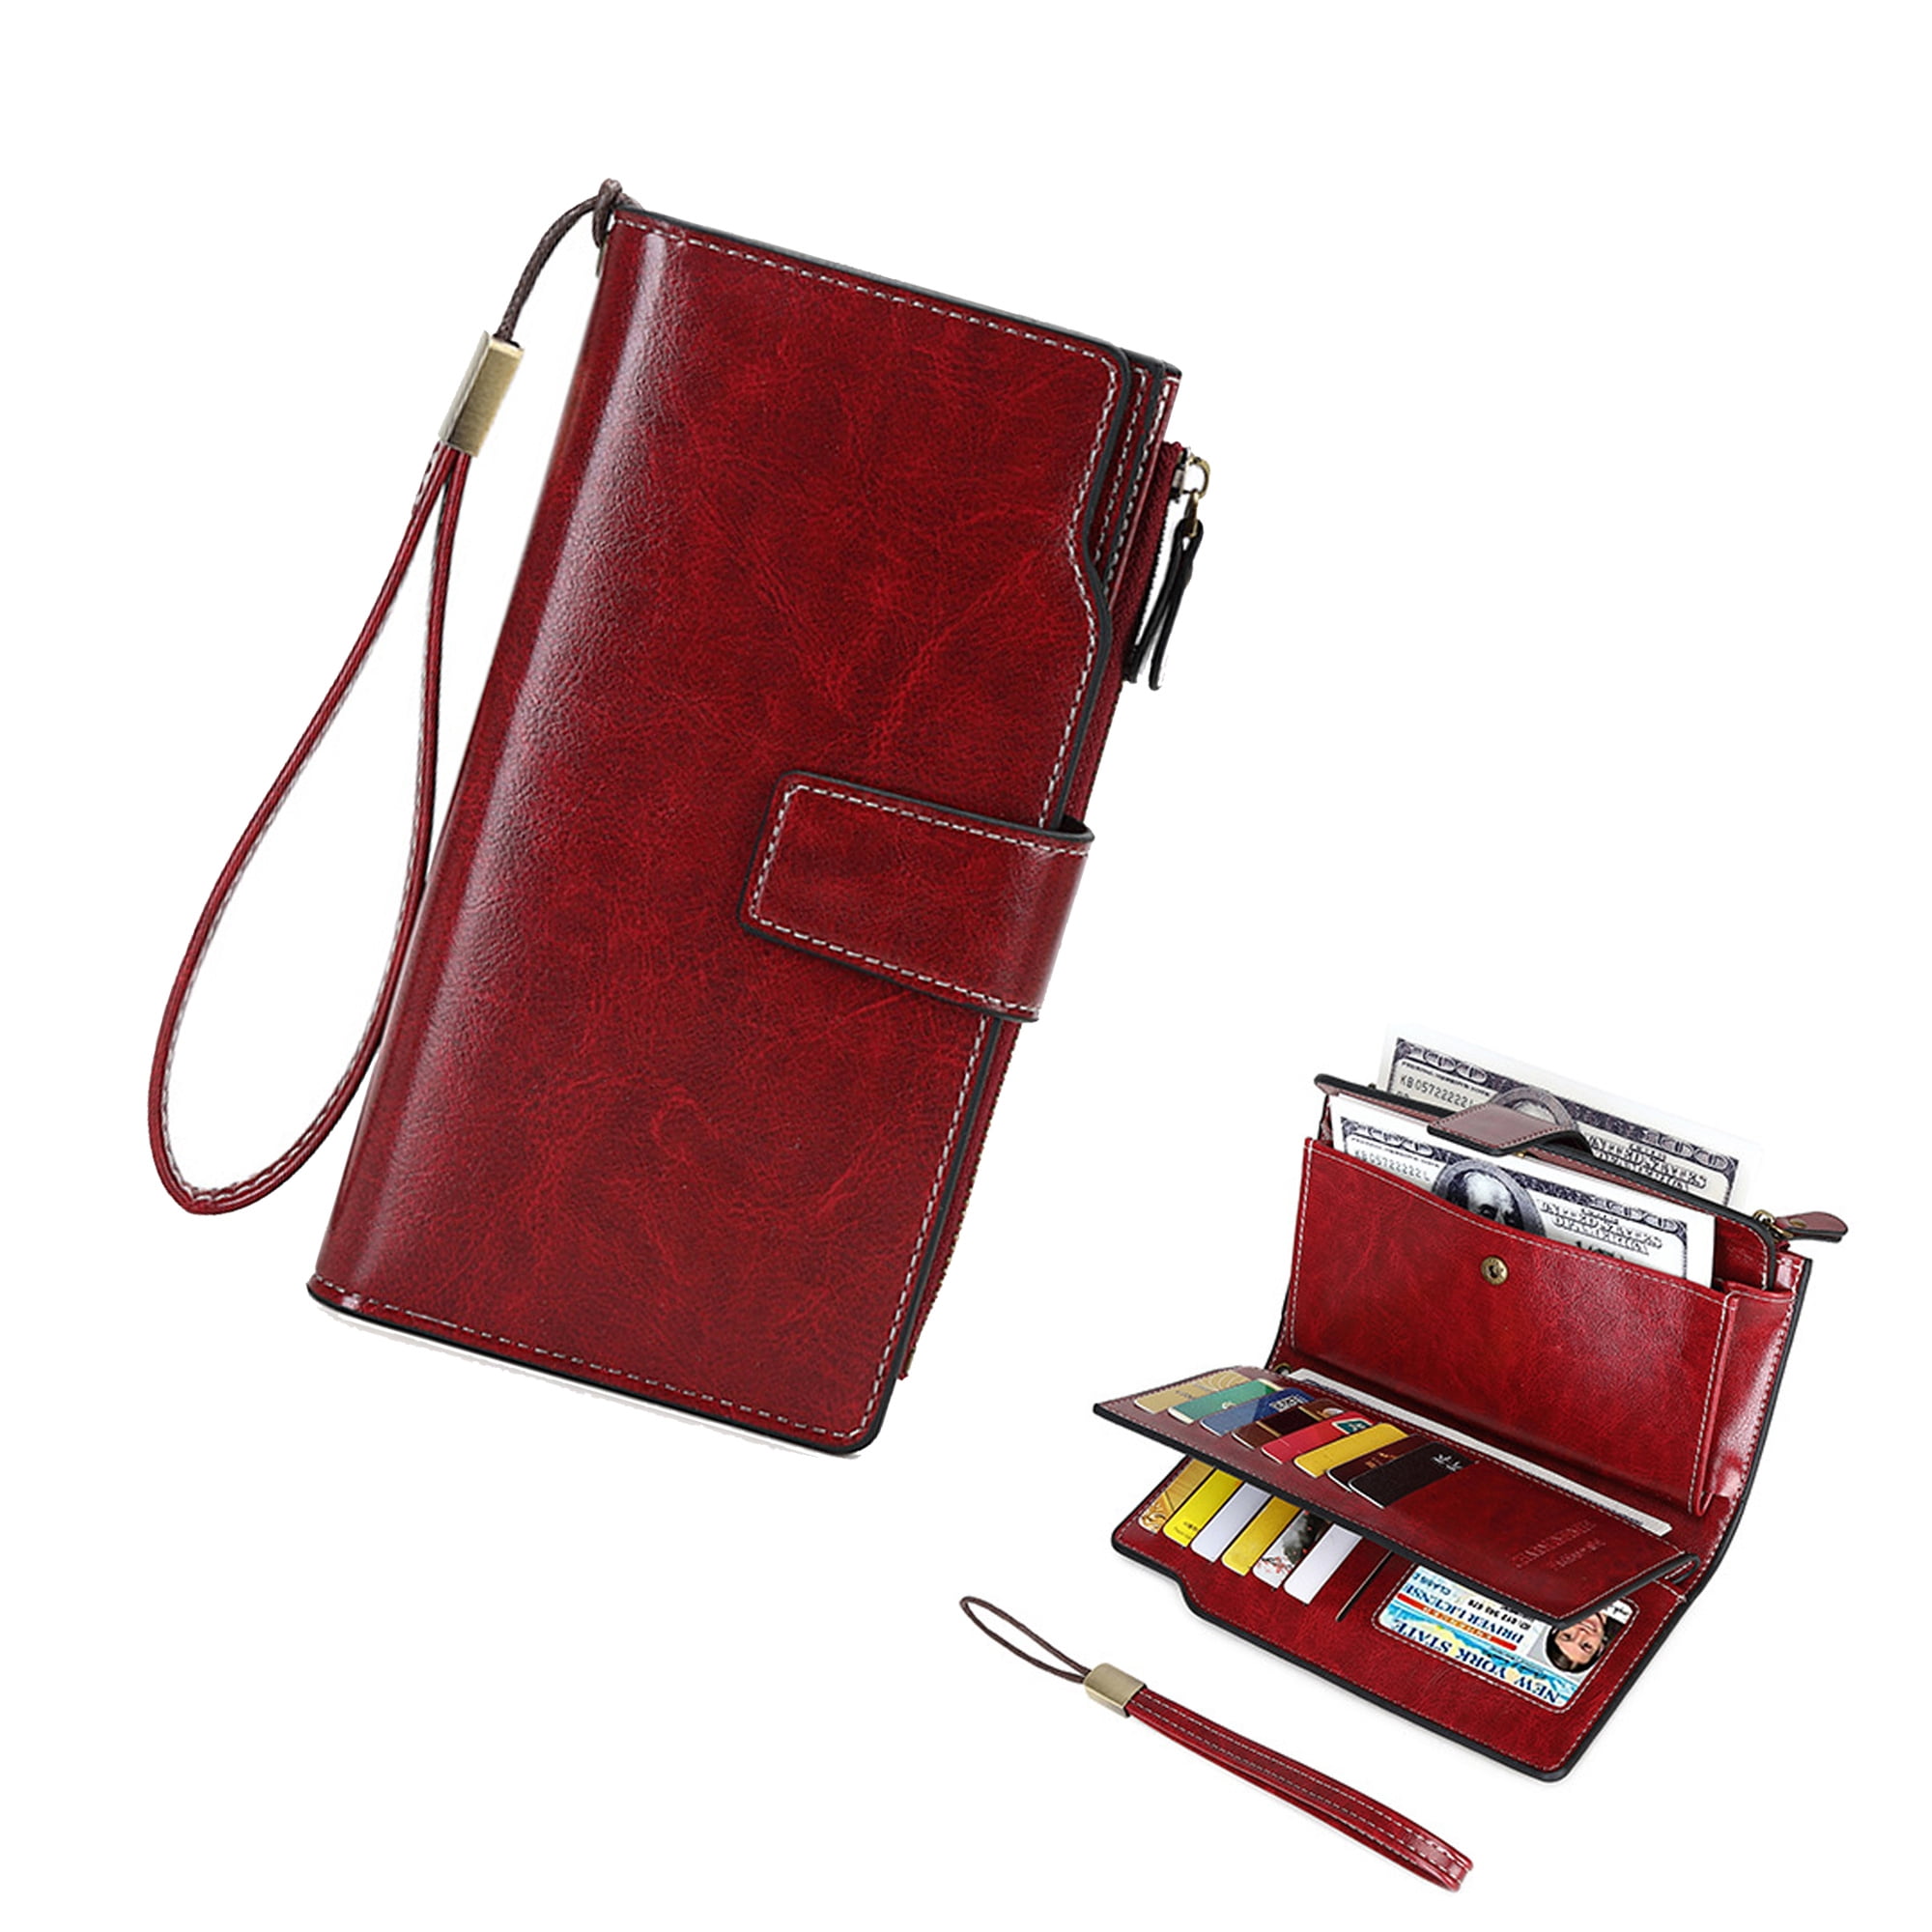 FOREVER YOUNG PL825-13 Women Long Wallet Clutch Bag PU Leather Purse - Wine  Red Wholesale | TVCMALL